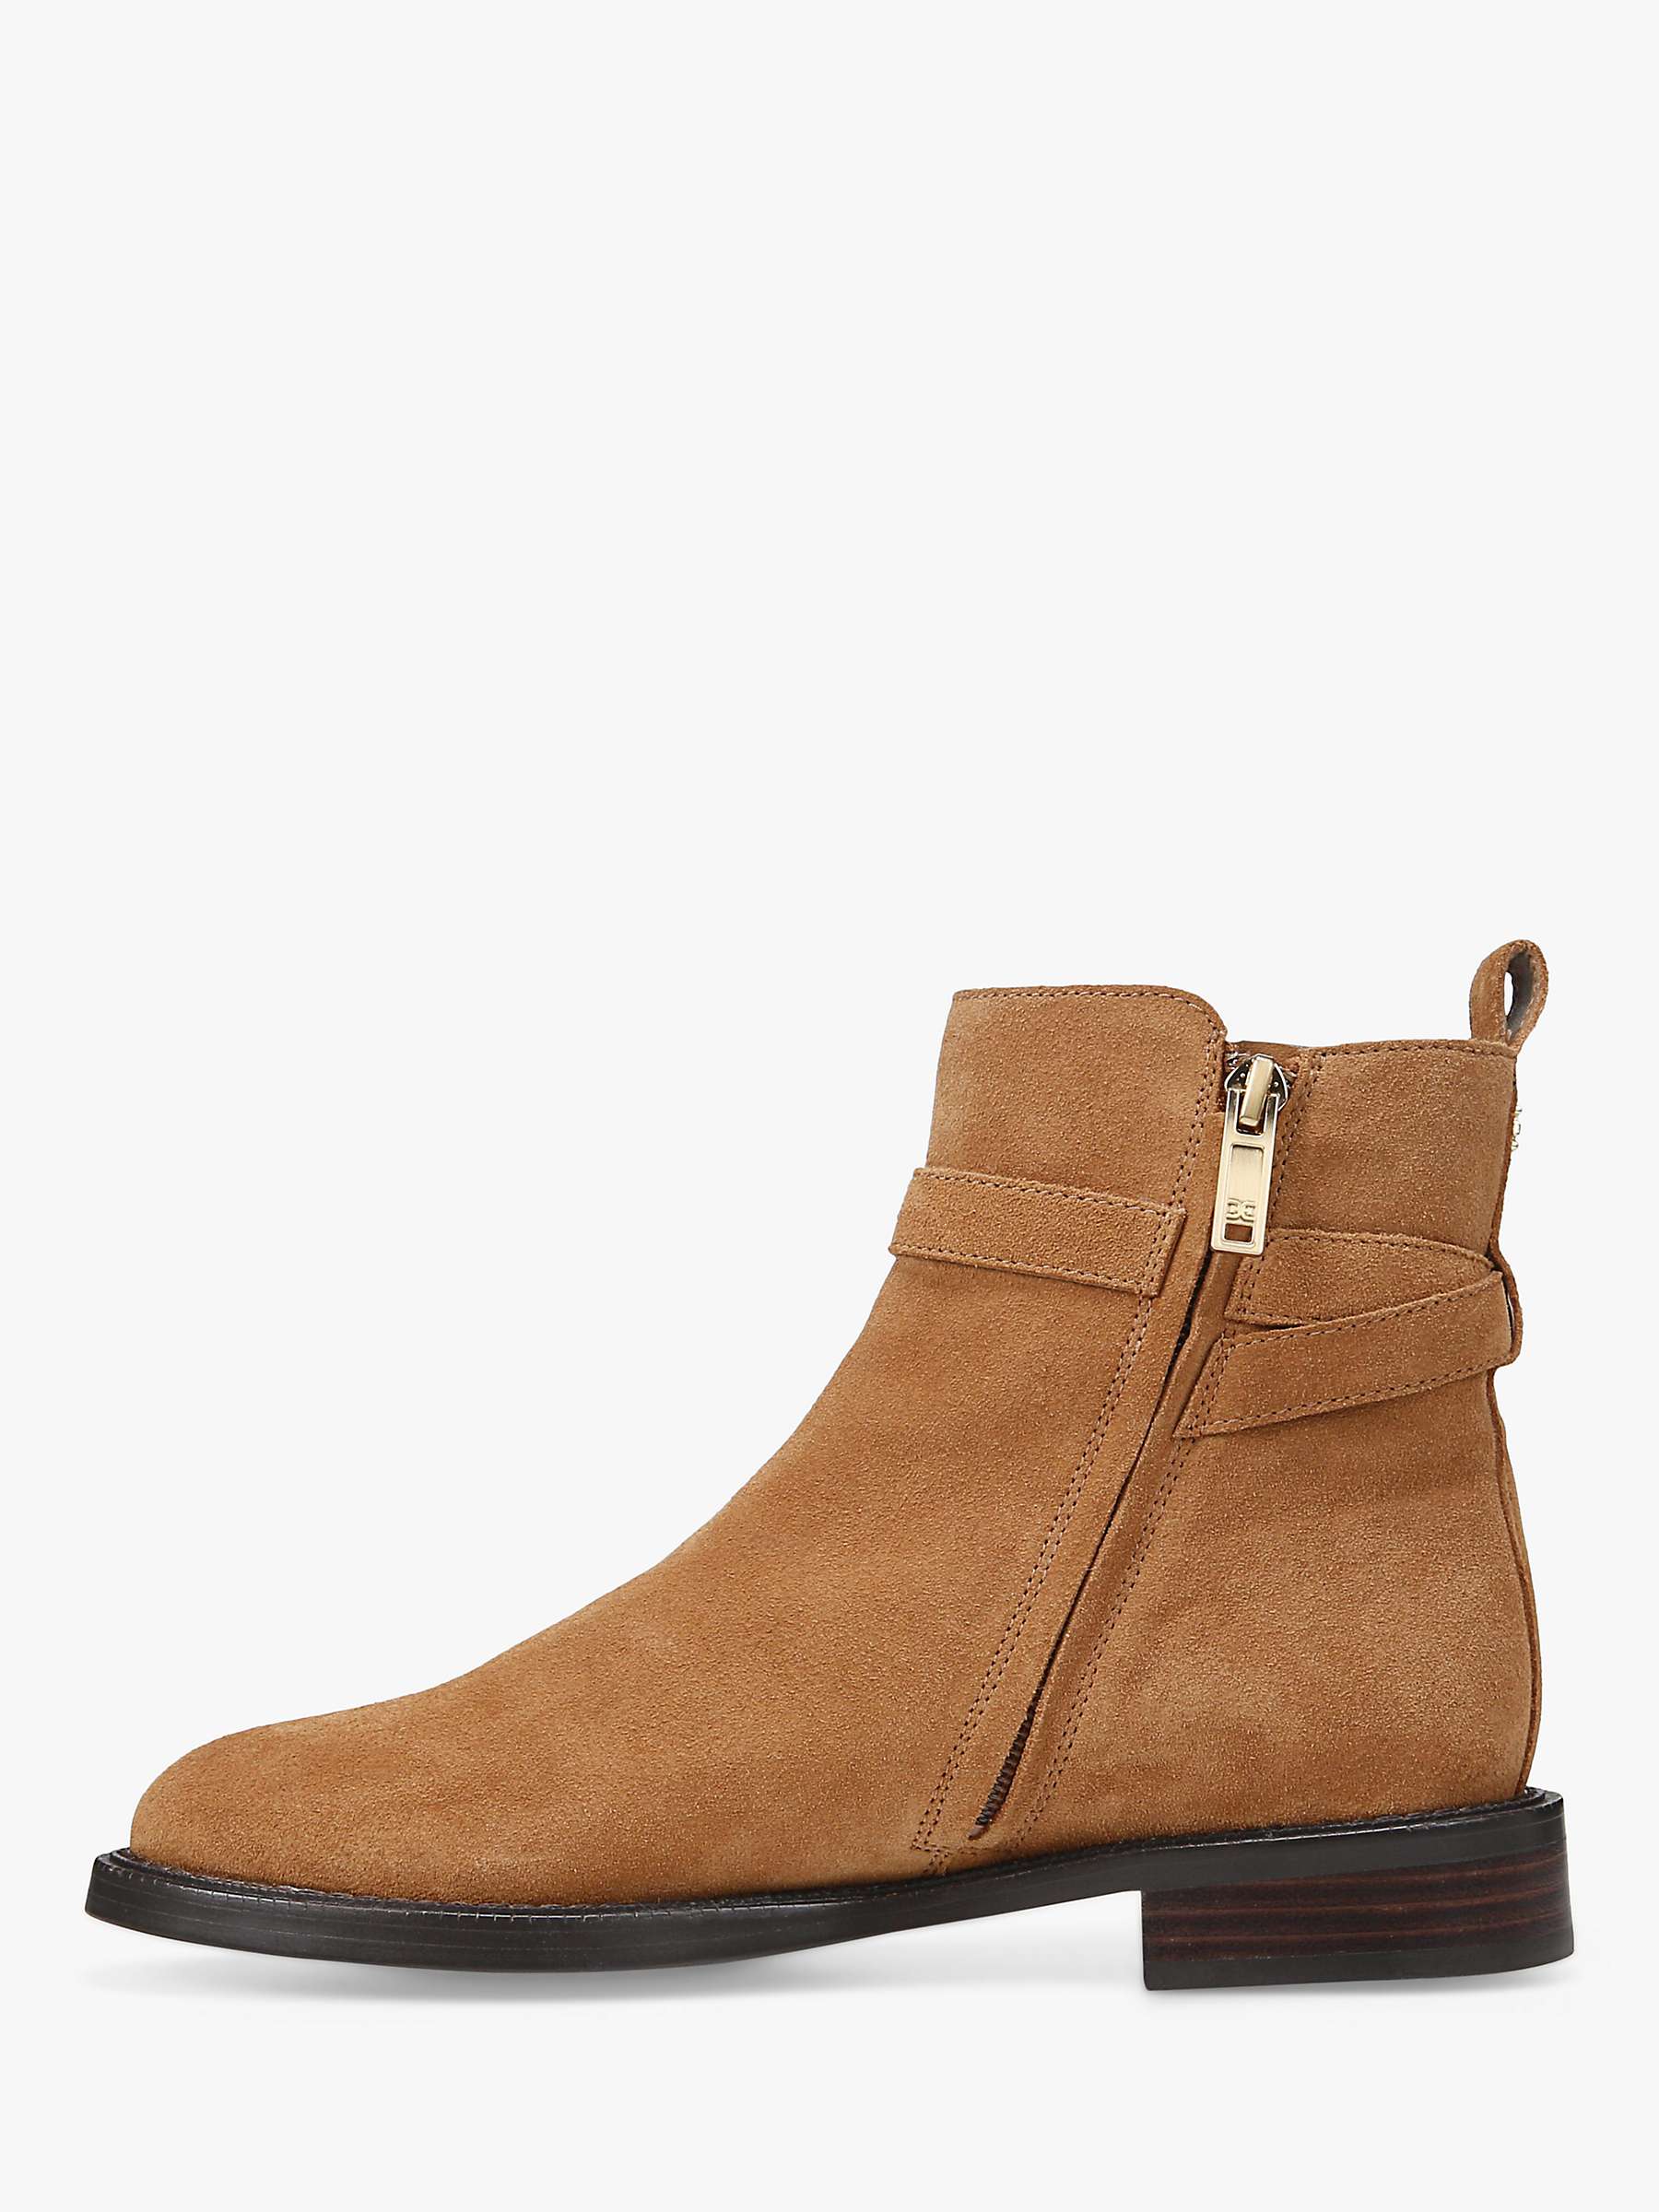 Buy Sam Edelman Nolynn Leather Ankle Boots Online at johnlewis.com